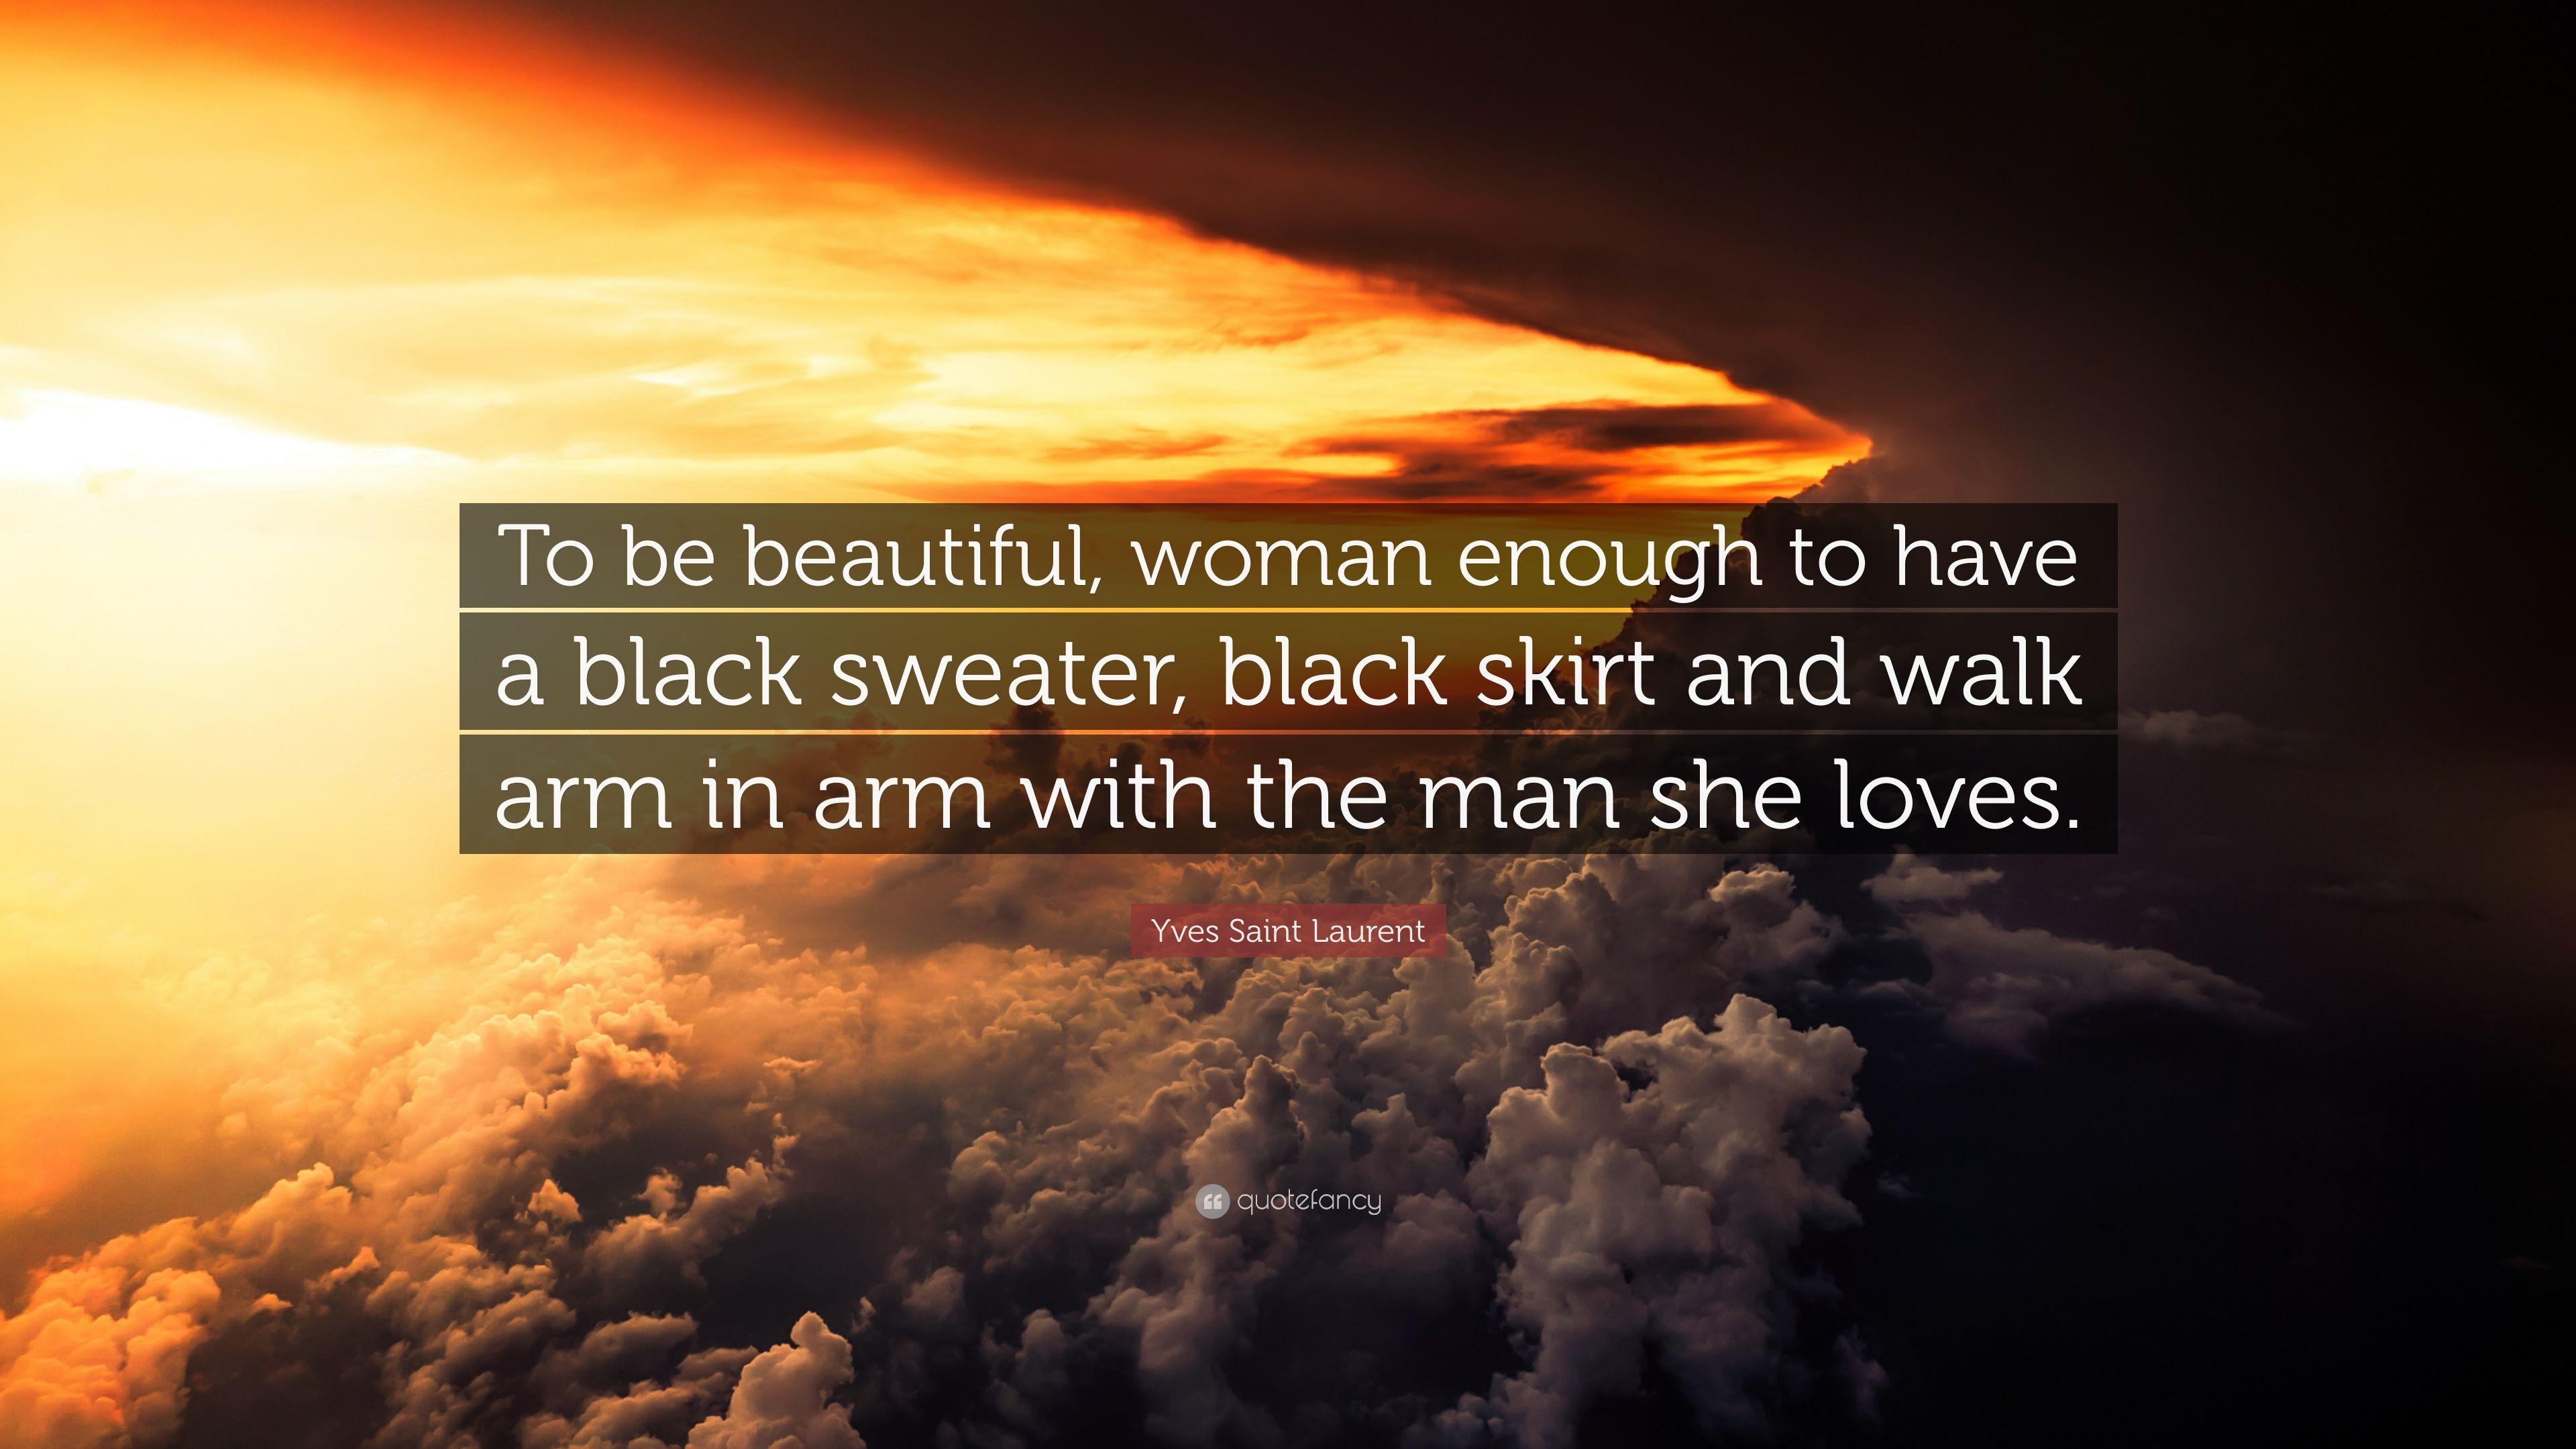 Yves Saint Laurent Quote: “To be beautiful, woman enough to have a